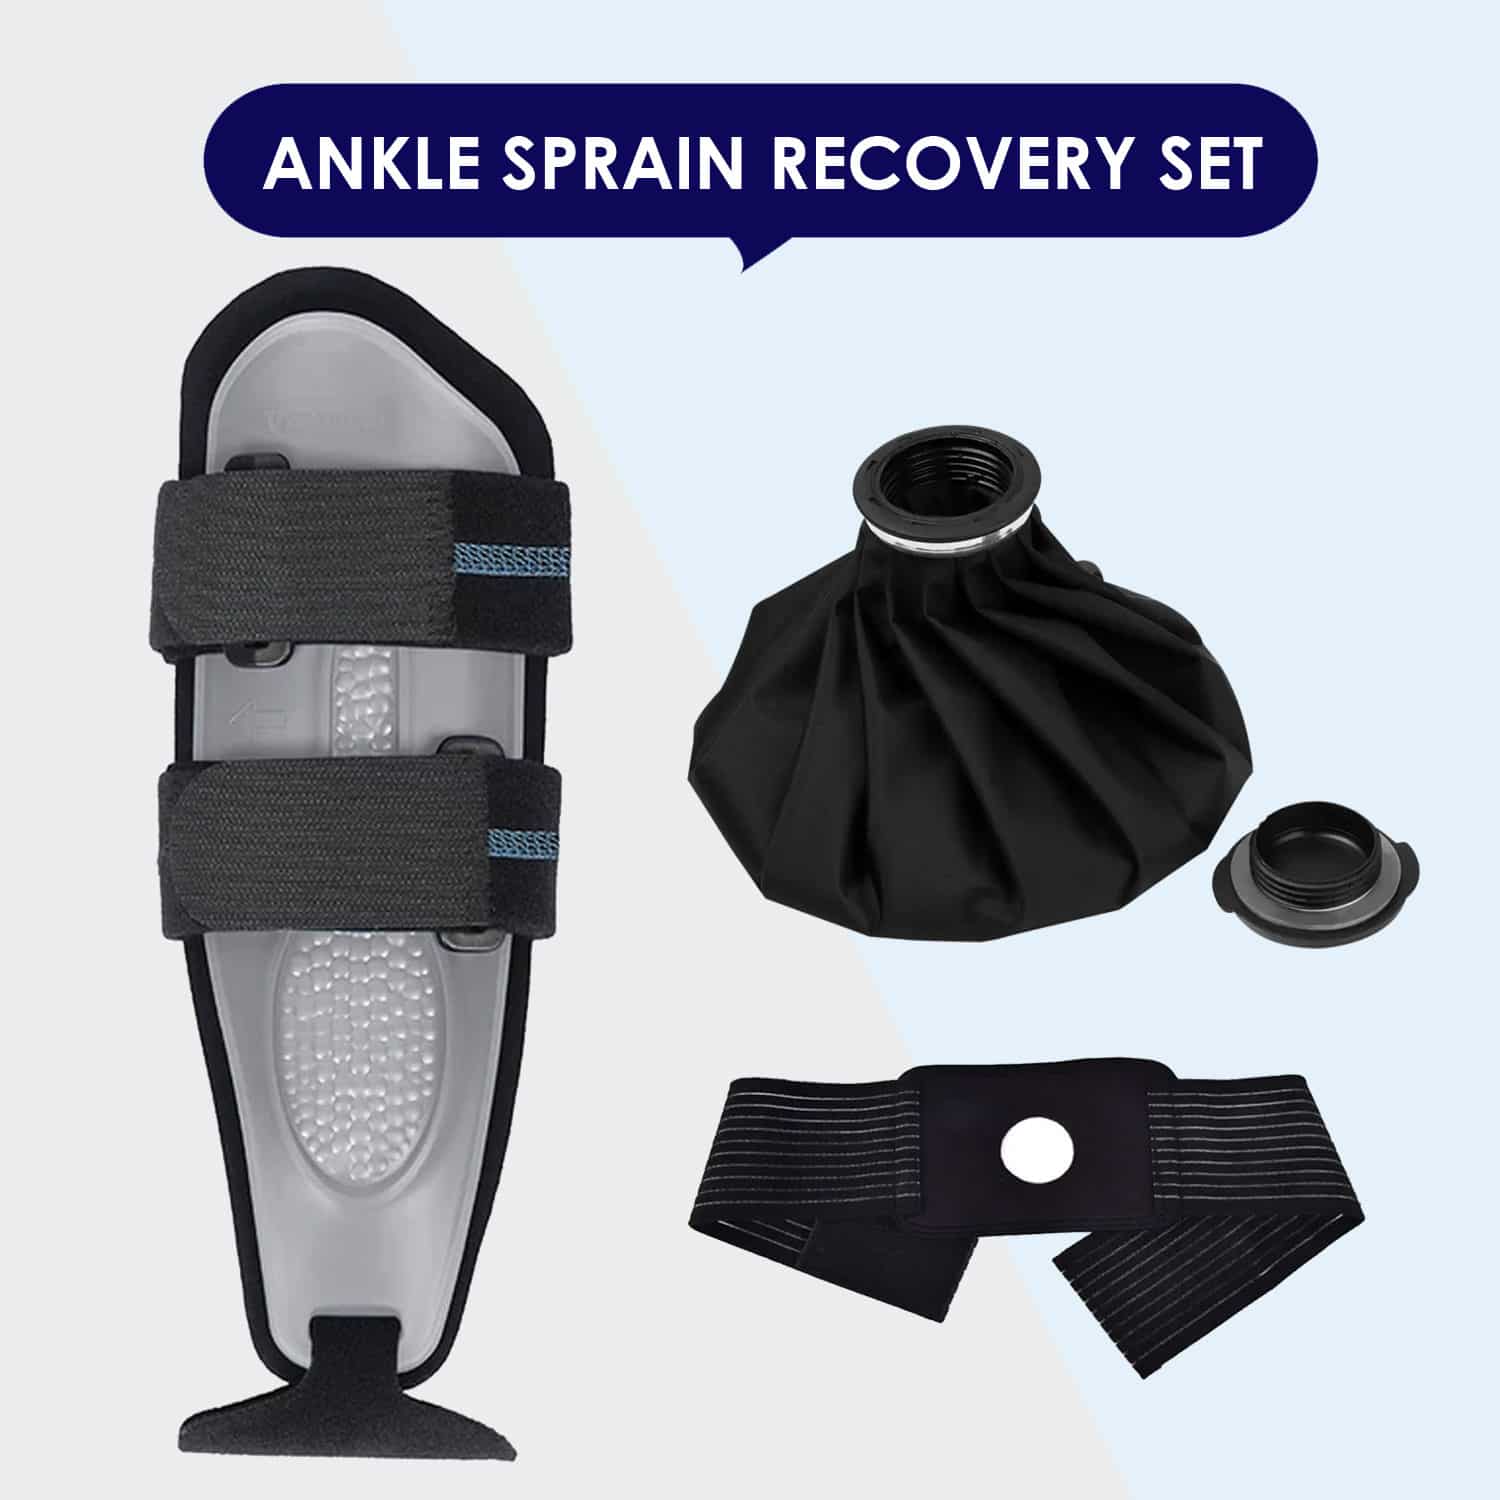 Ankle Sprain Recovery Set